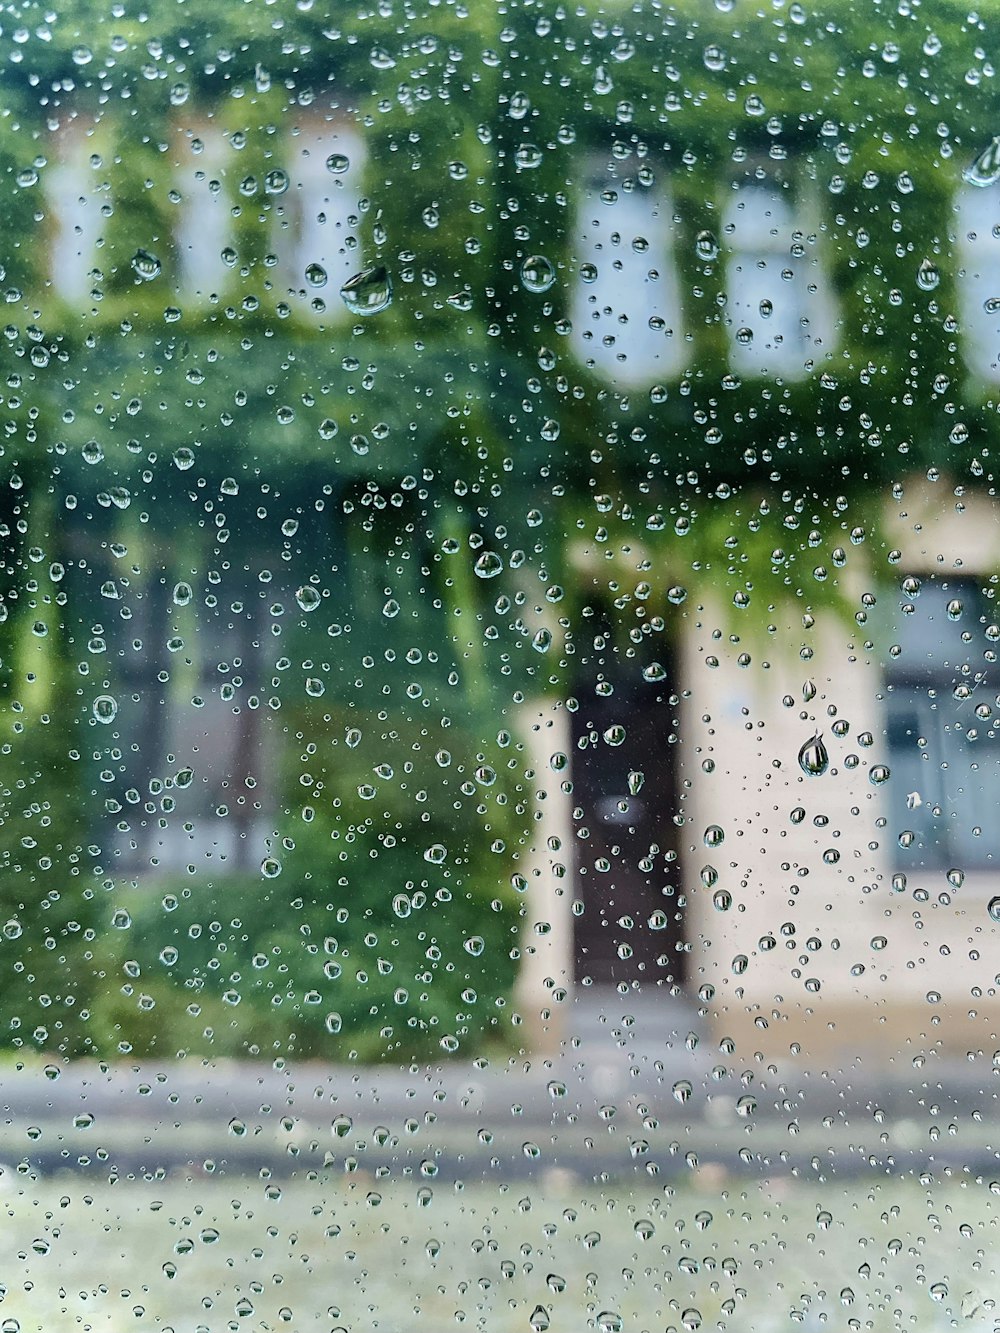 rain drops on a window with a house in the background